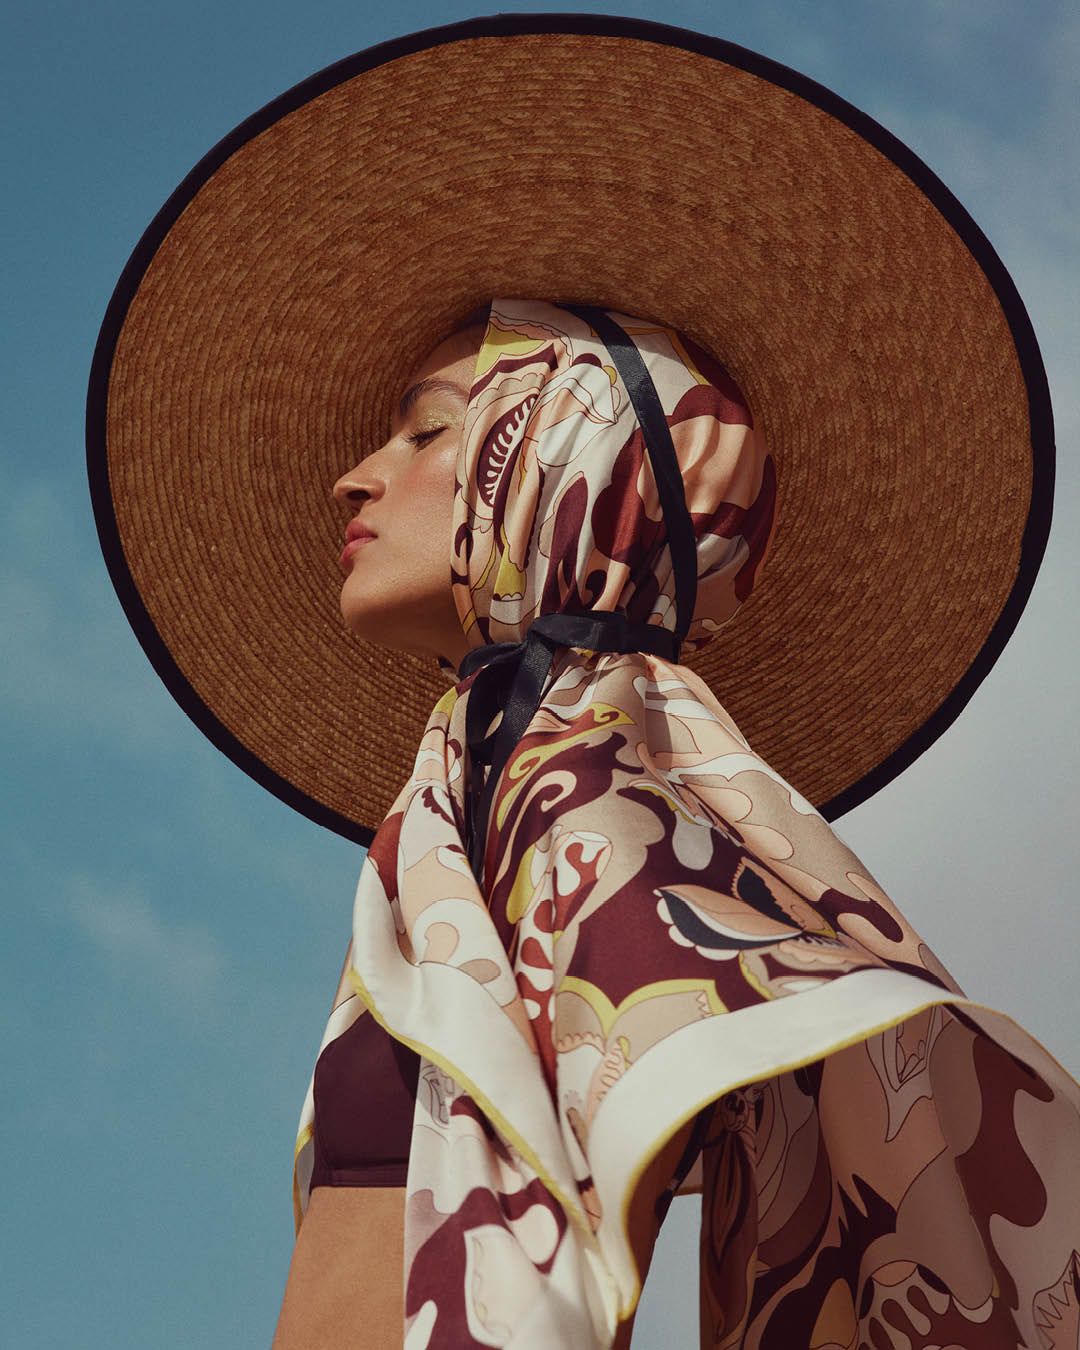 Model facing the side with eyes closed wearing straw hat with a brown, yellow and white scarf over her head and shoulders